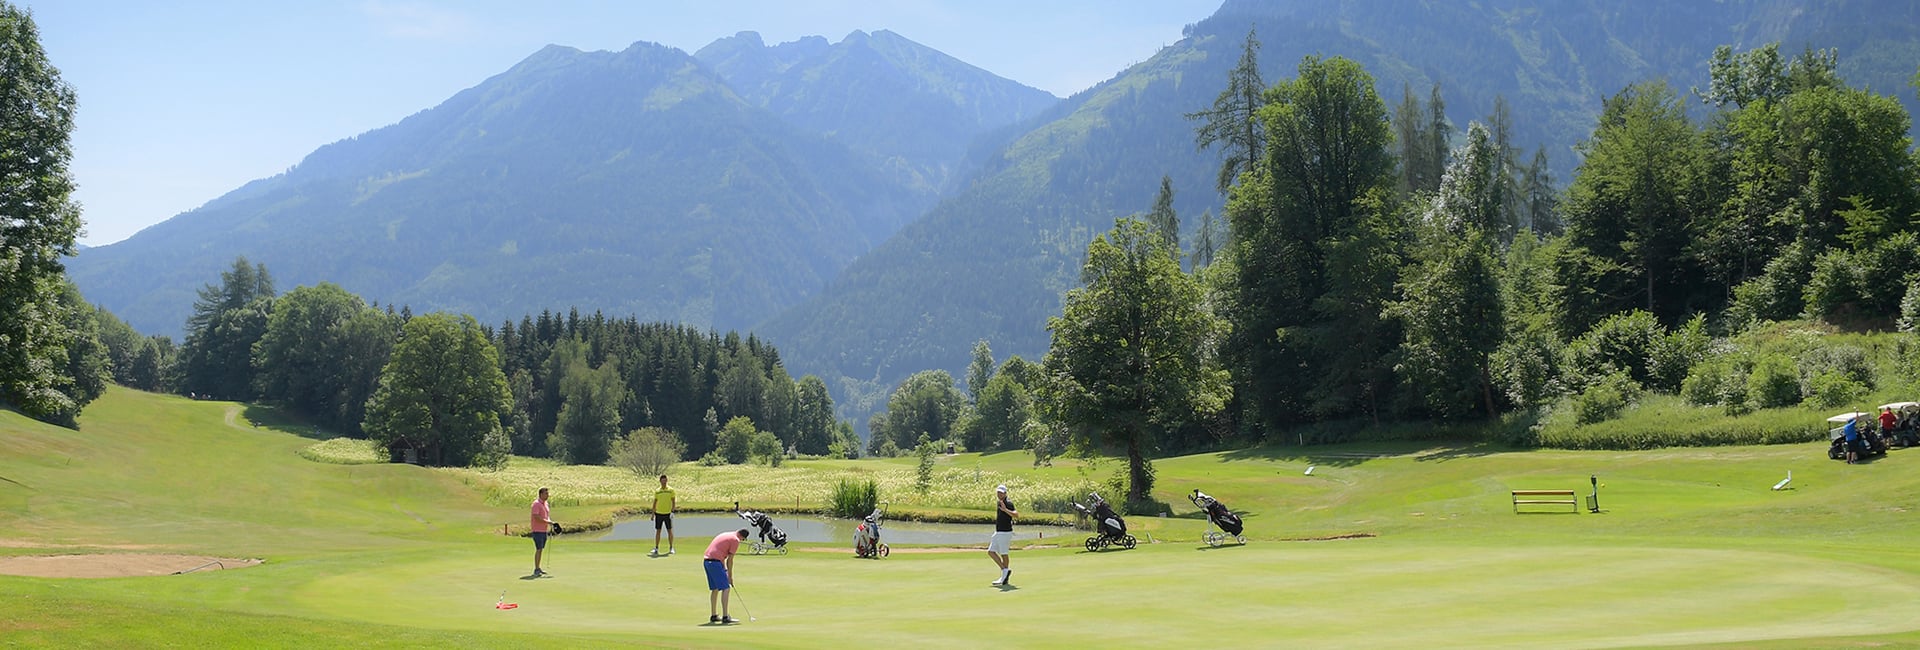 There are many opportunities to play mini golf or gold near our hotel in Grossarl (Pongau)